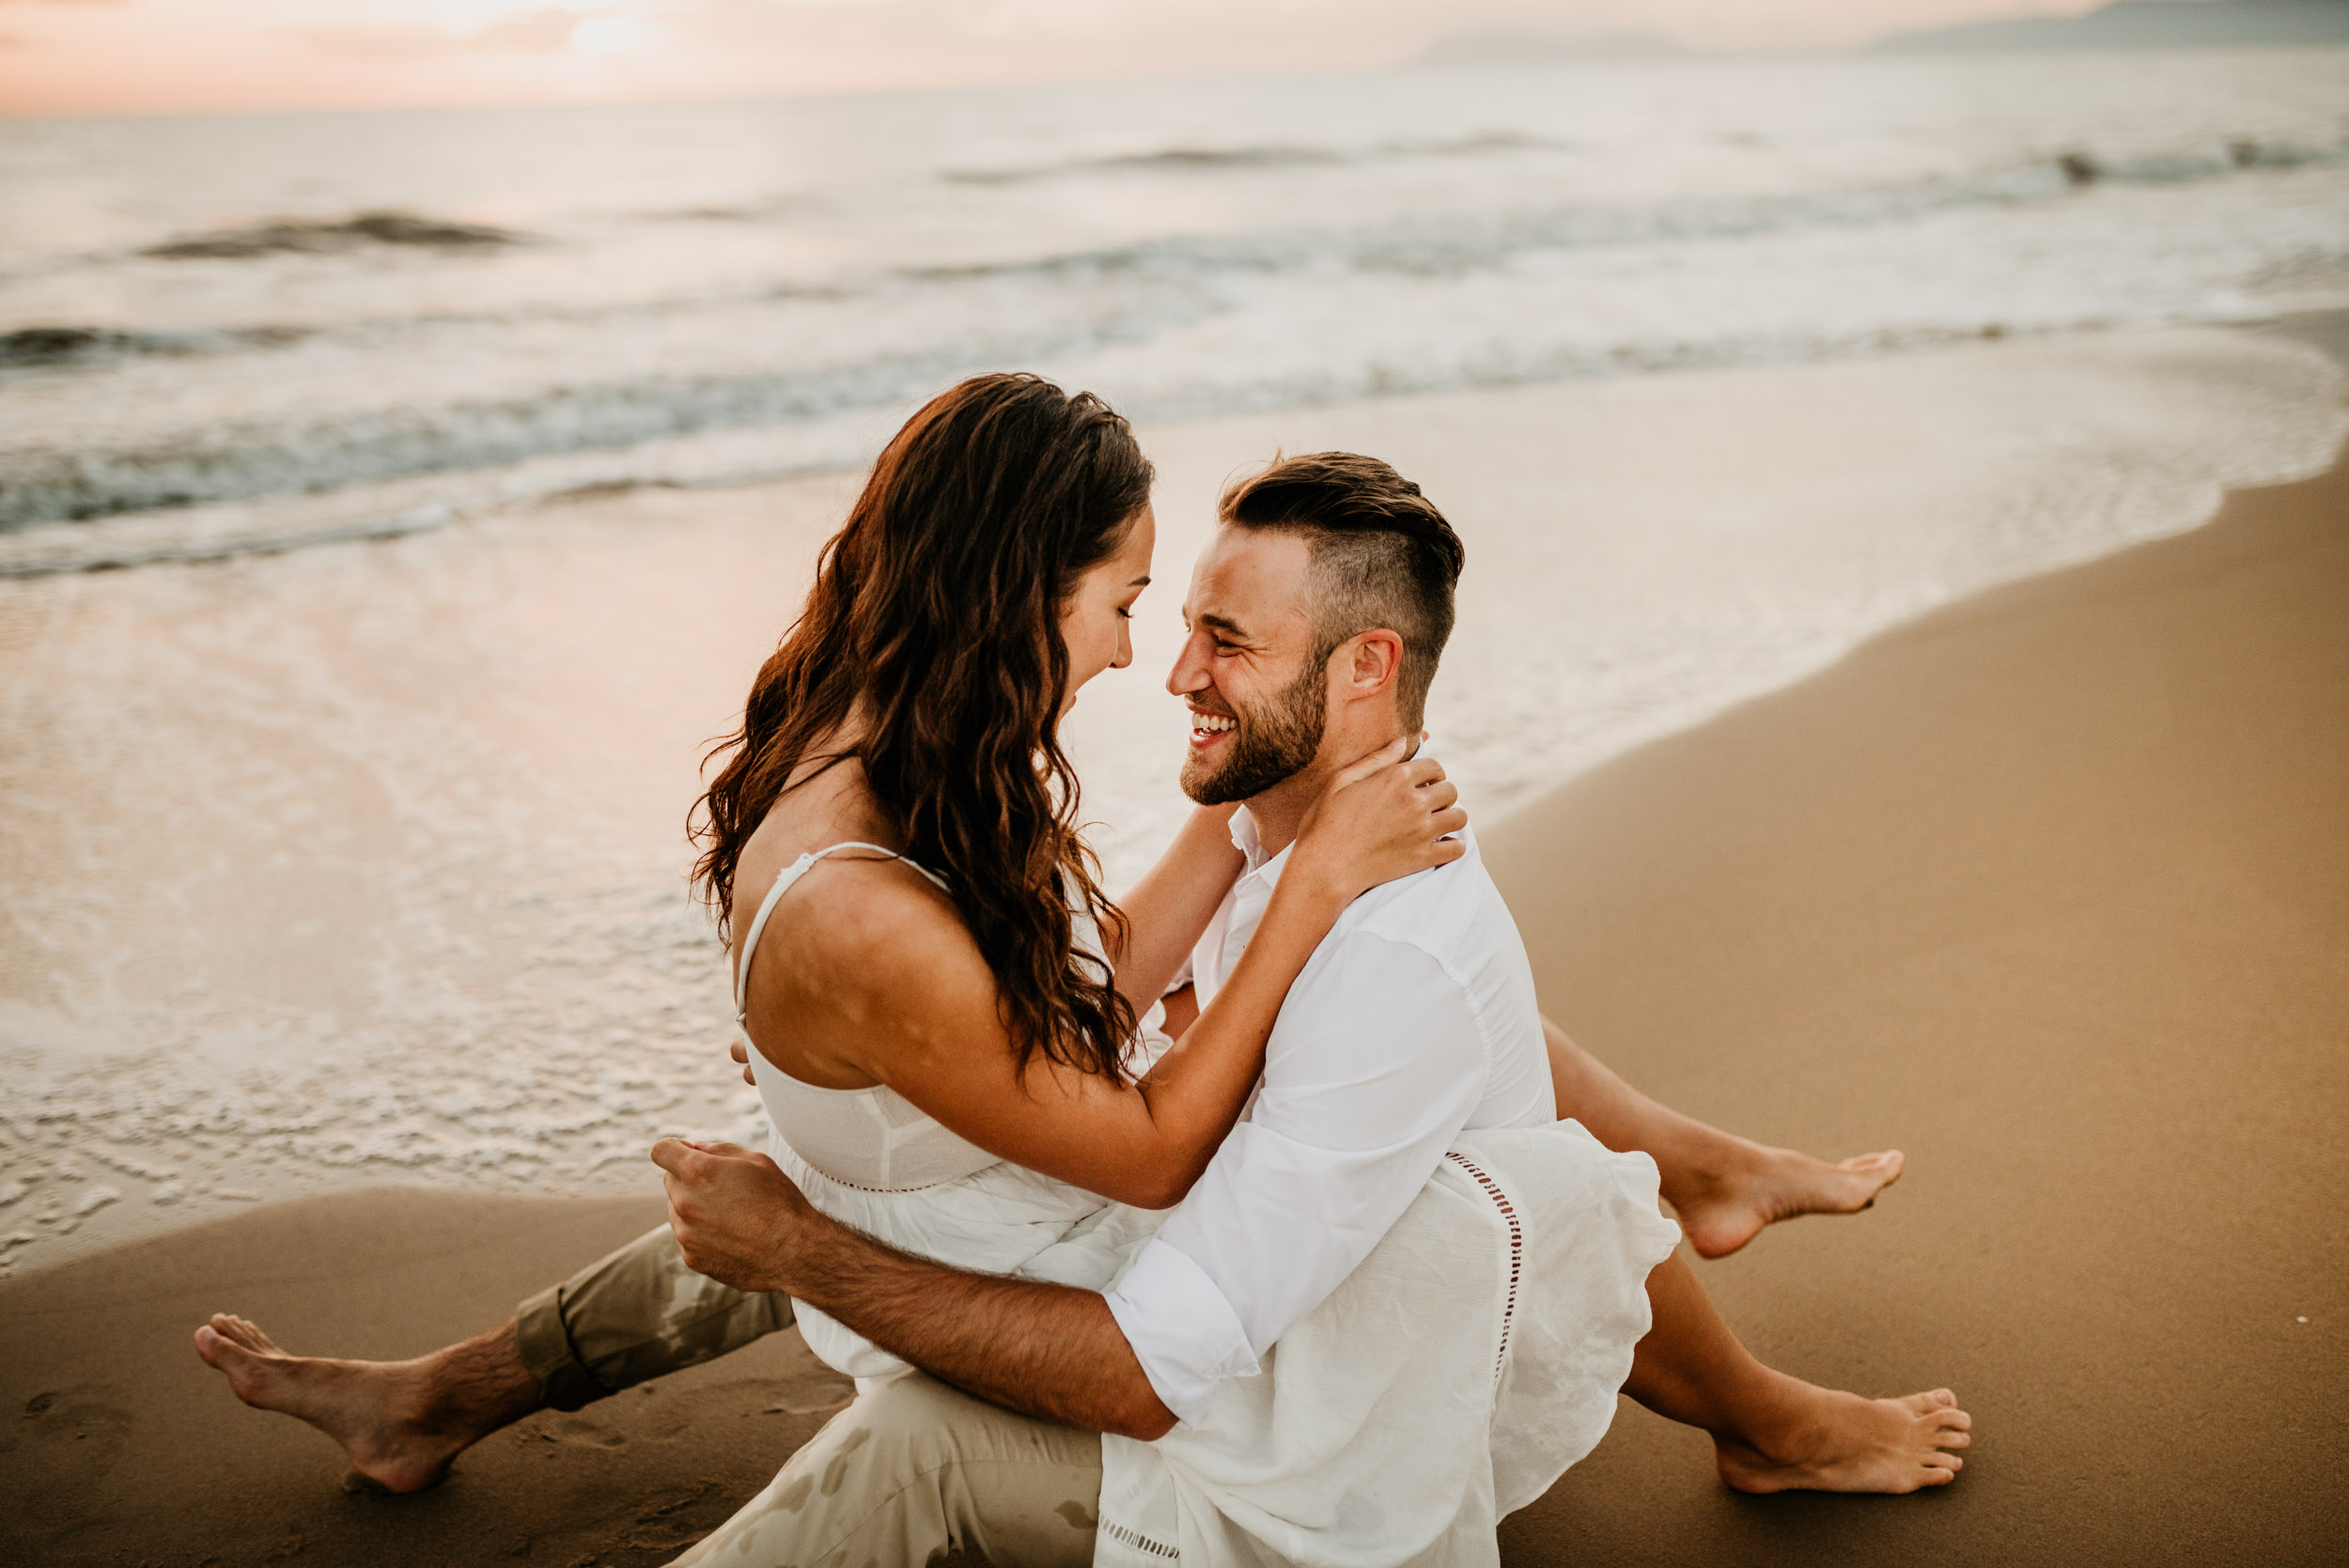 The Raw Photographer - Cairns Wedding Photographer - Engaged Engagement - Beach location - Candid Photography Queensland-11.jpg